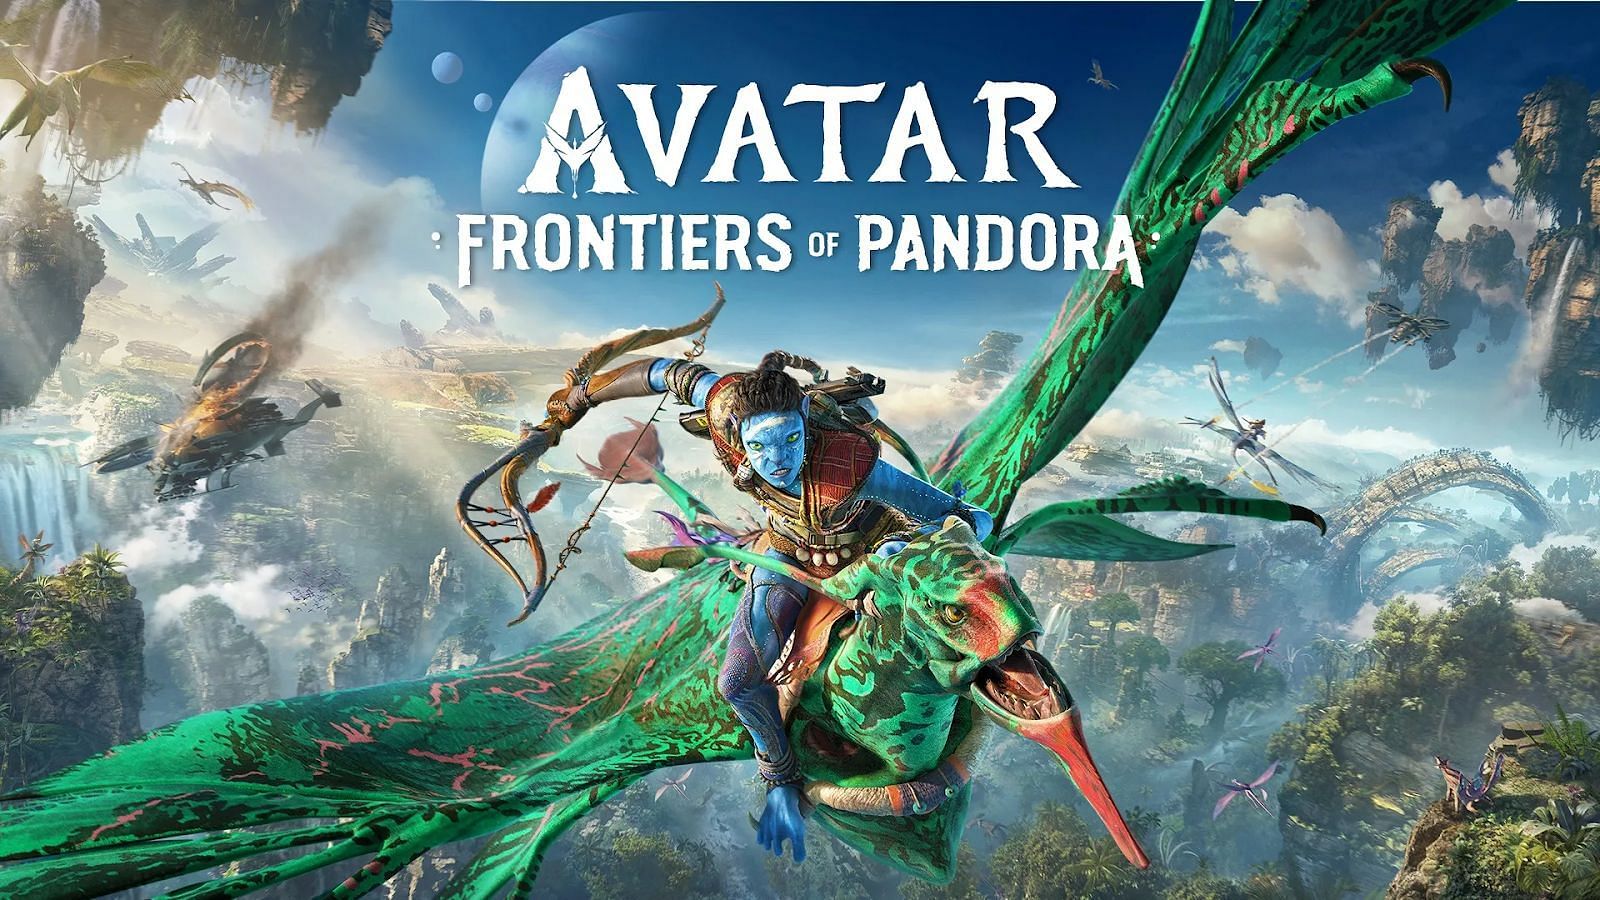 What are the specs for Avatar: Frontiers of Pandora?